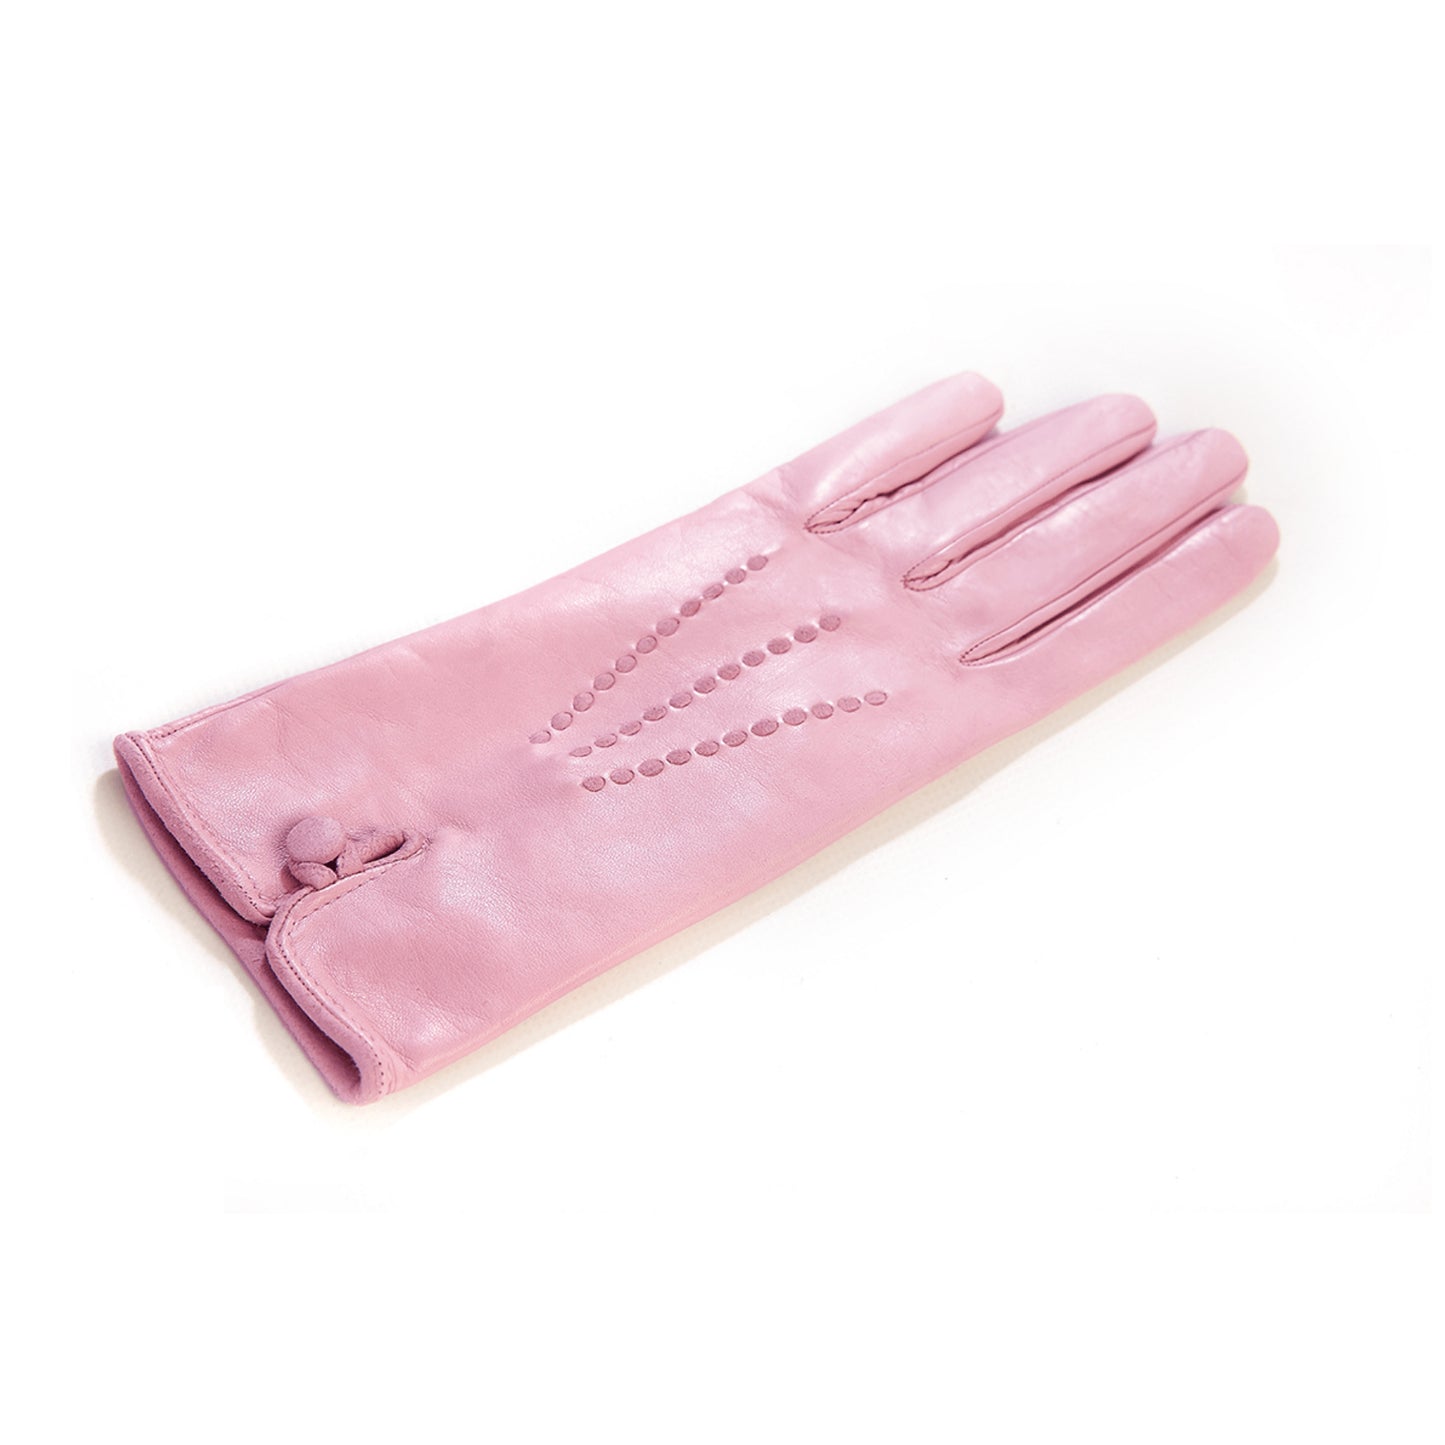 Women's silk lined gloves in soft real leather of color rose